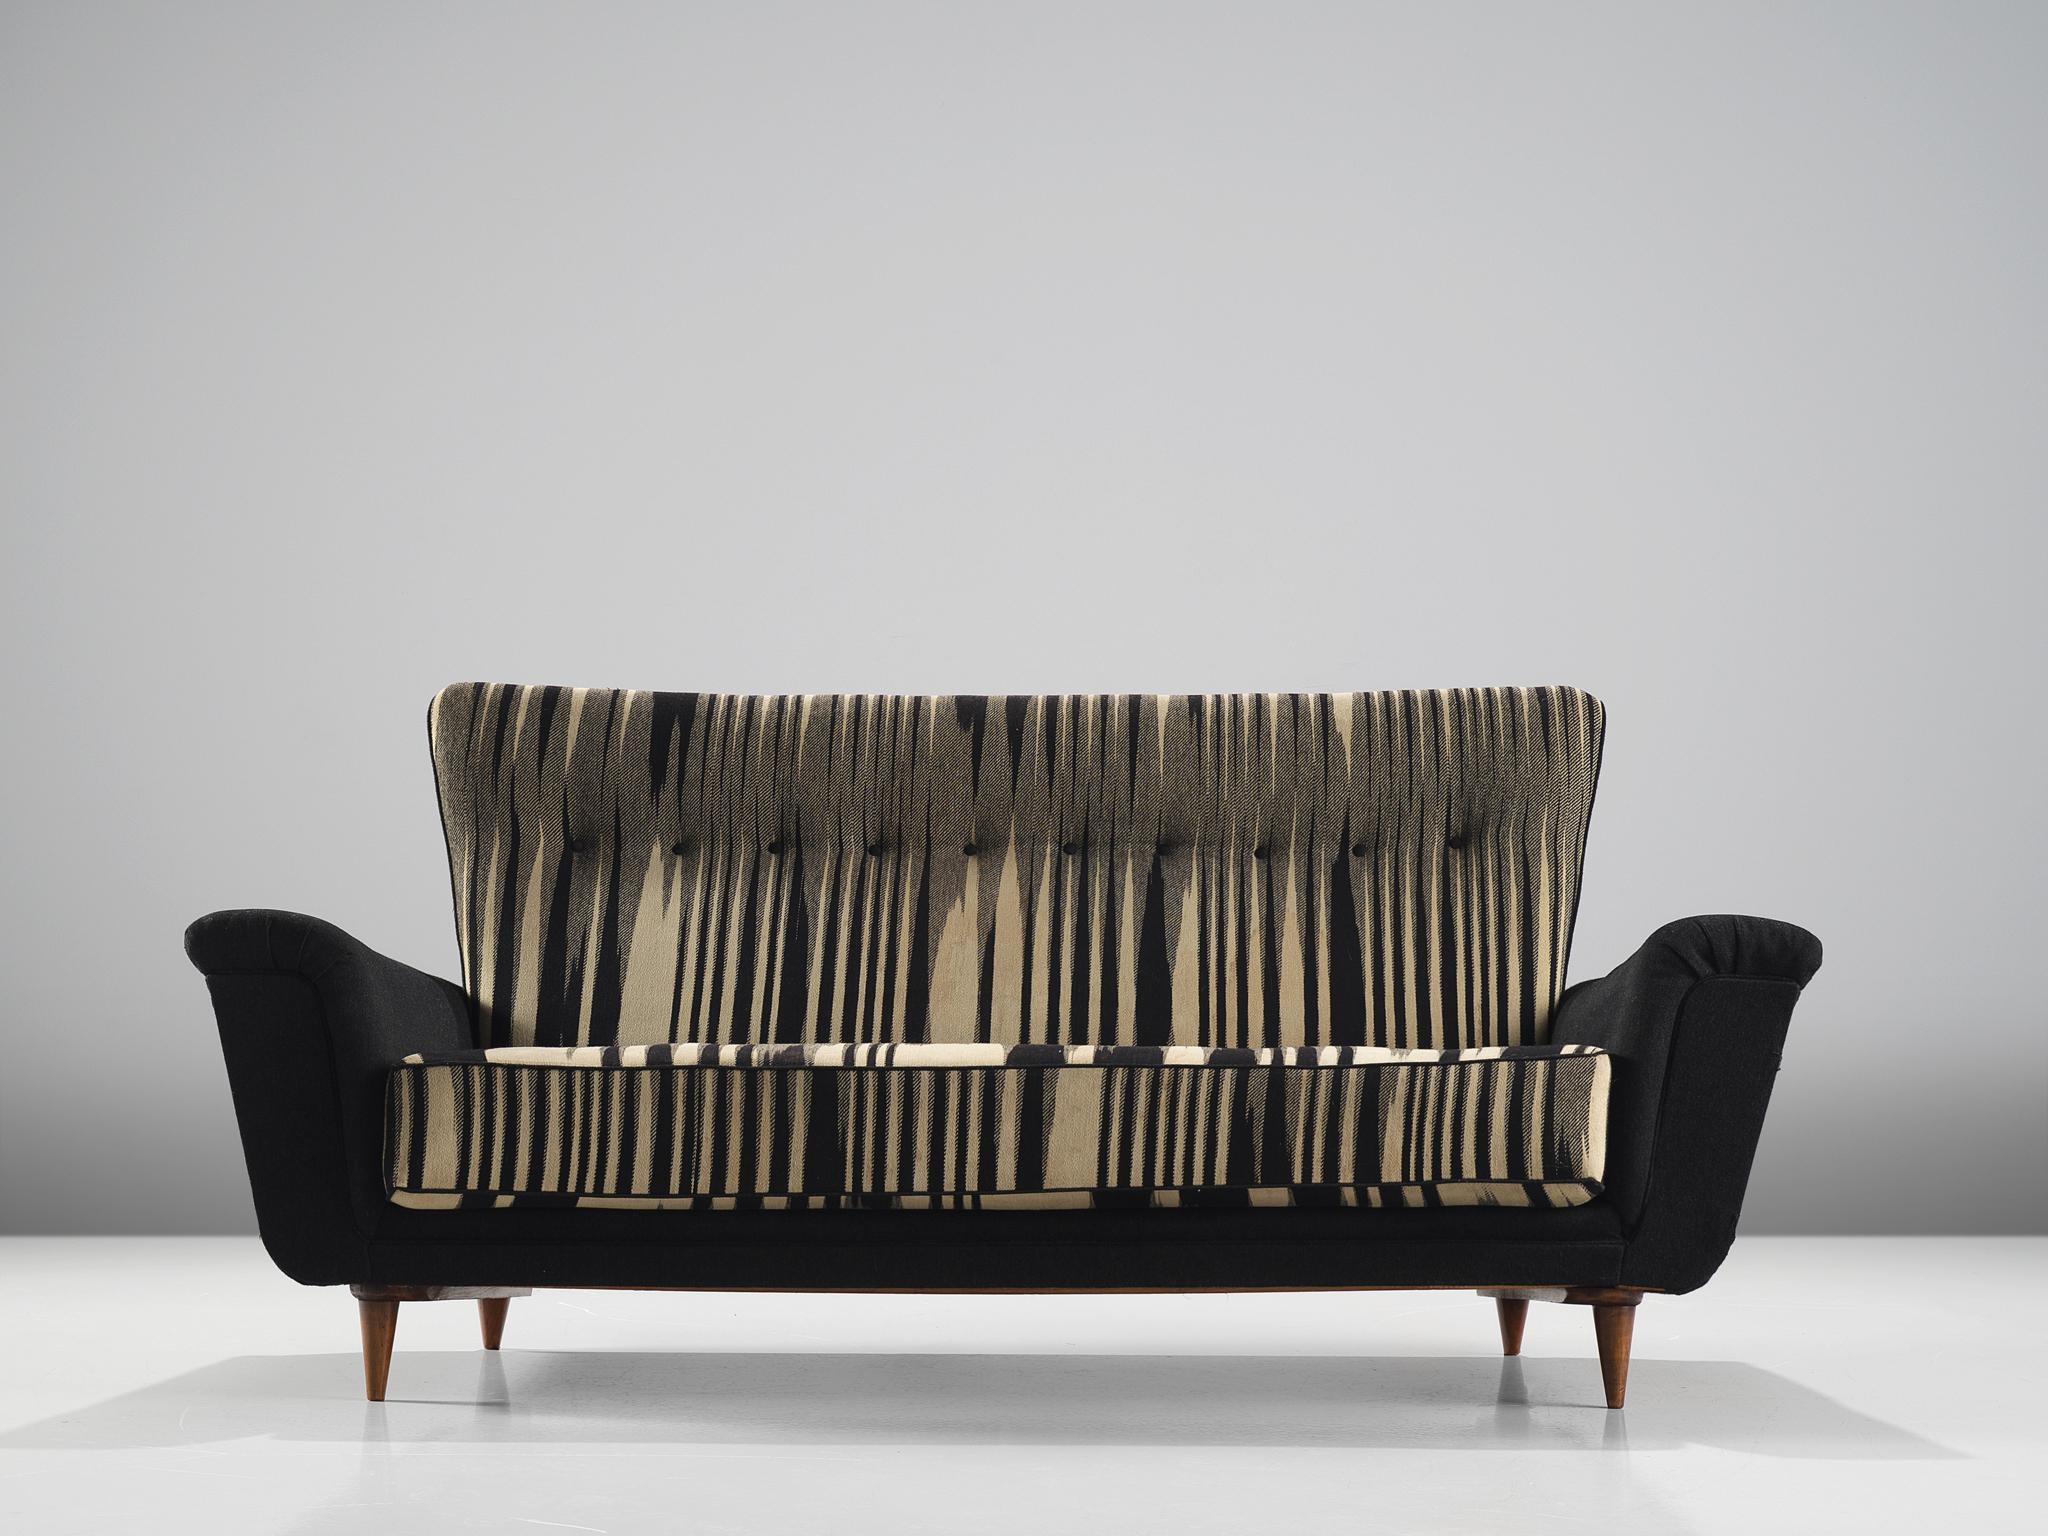 Artifort sofa, black and white fabric, wood, The Netherlands, 1950s.

This sofa is an iconic example of Dutch design from the 1950s. The sofa is on the one hand simplistic, with elegant, subtle lines. On the other hand the settee has a certain